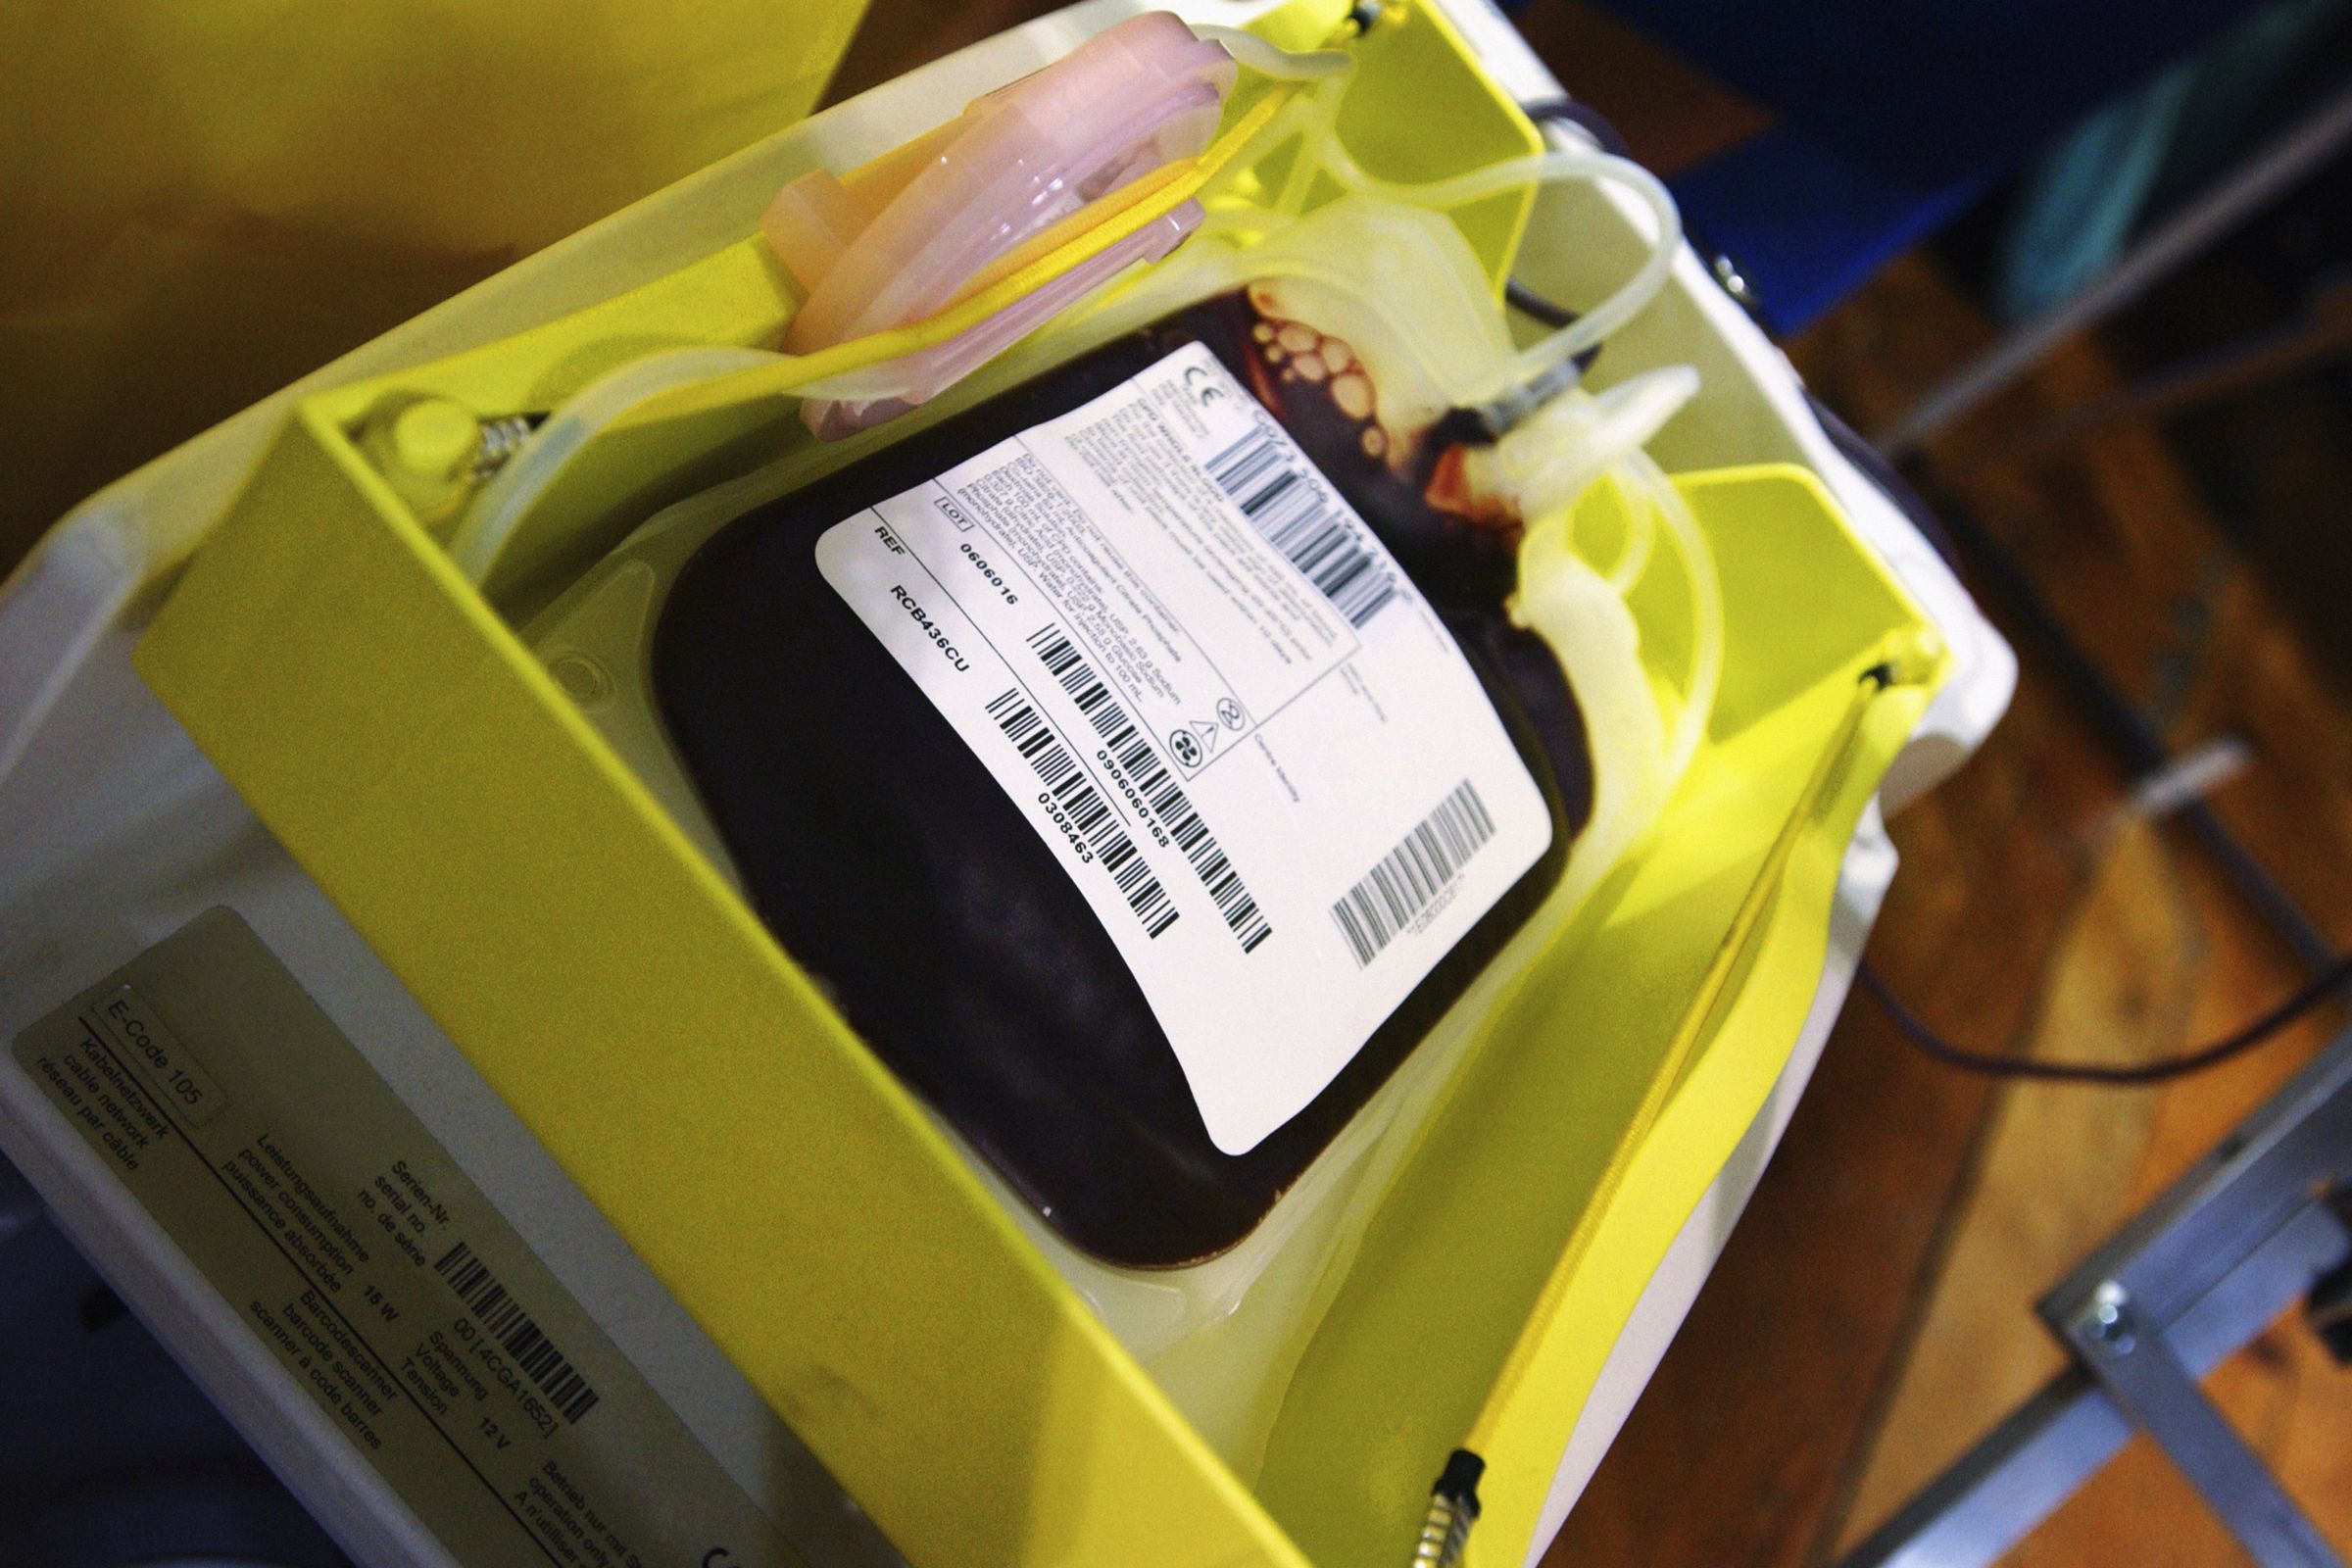 Storage bag being filled with recently donated blood